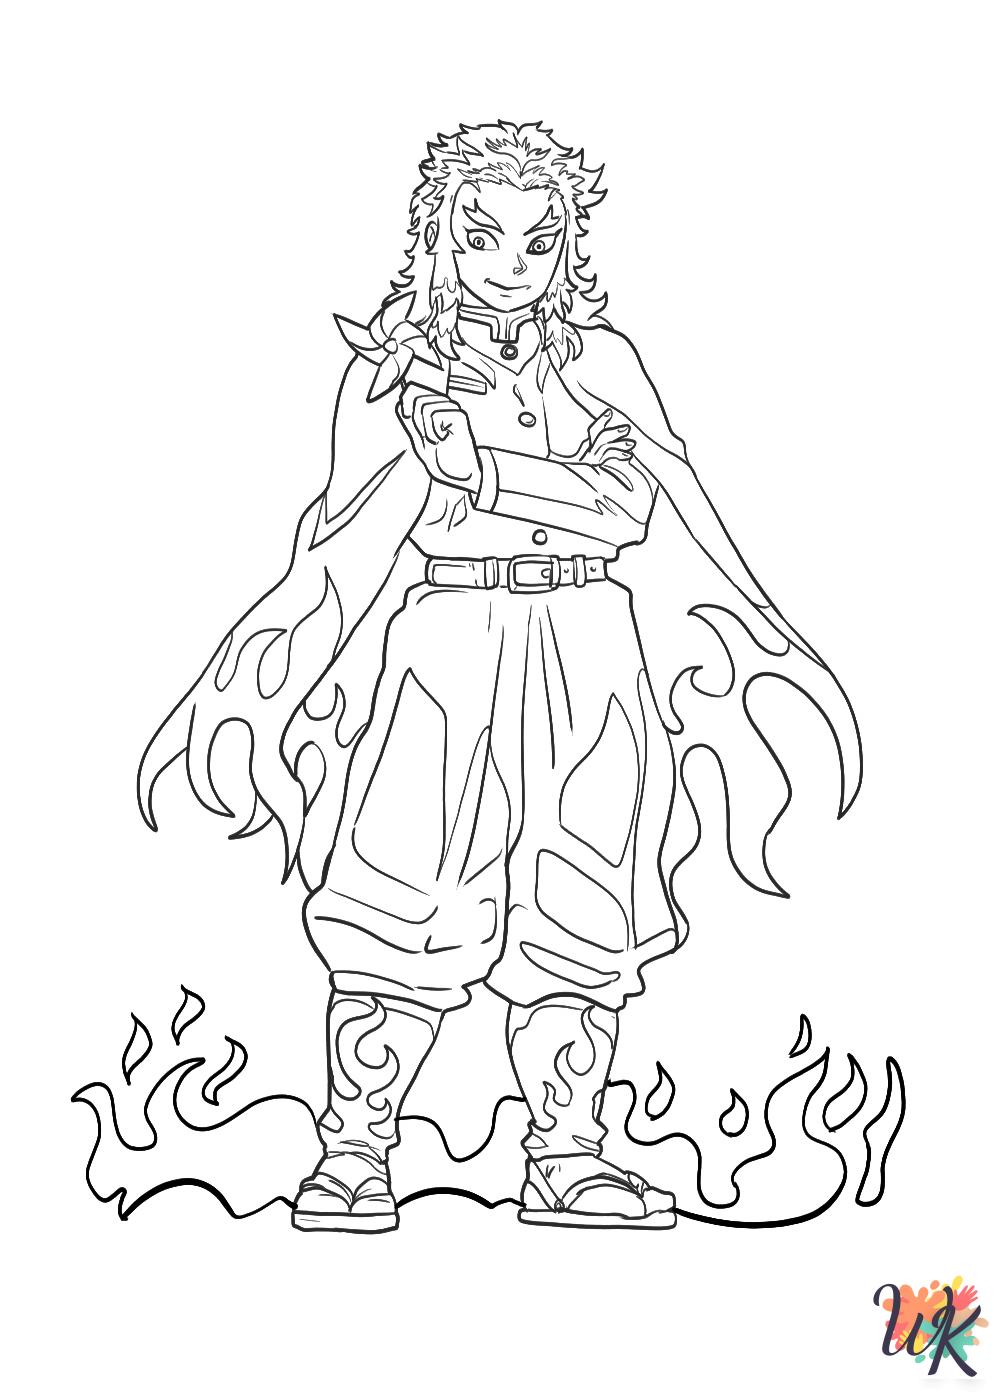 Demon Slayer coloring pages for preschoolers